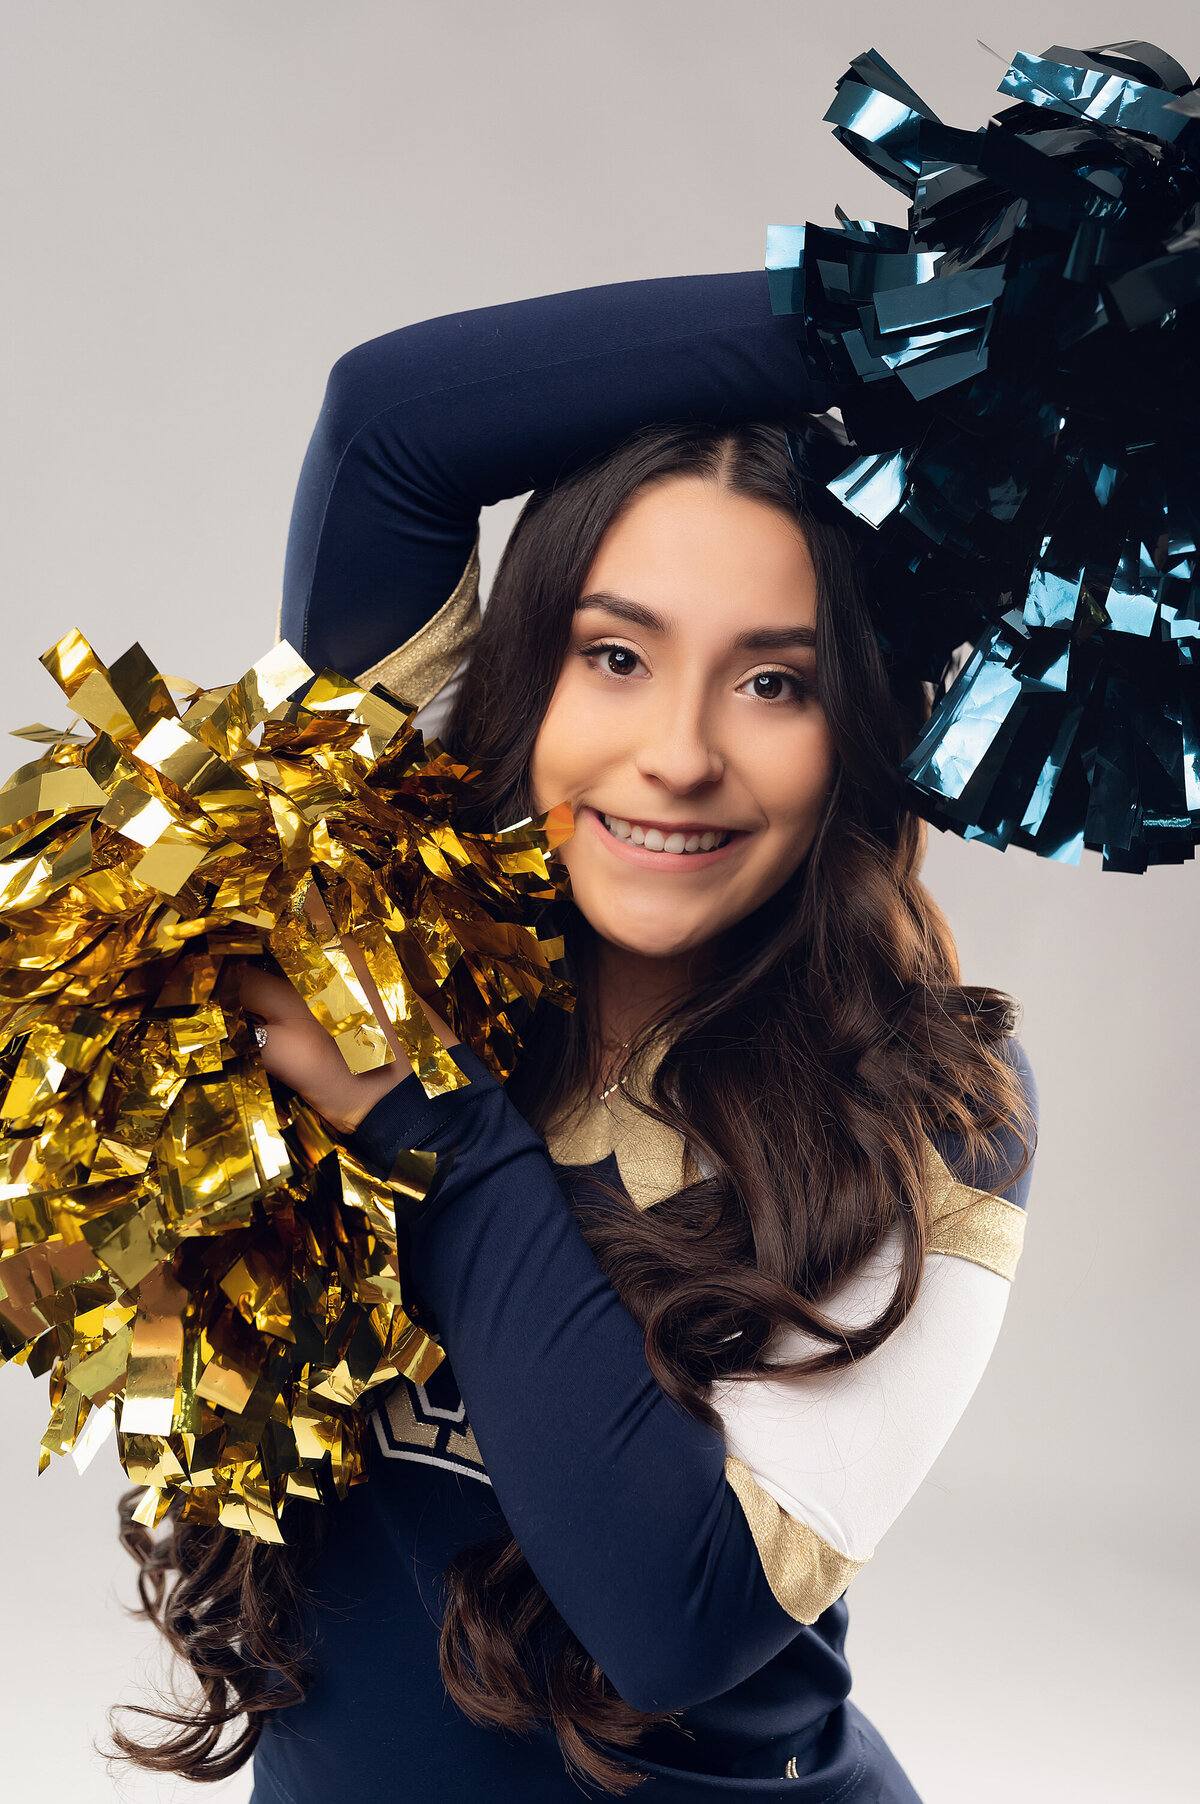 A senior cheerleader from Kettle Moraine High School poses in our Waukesha studio wearing her uniform and holding her pompoms.